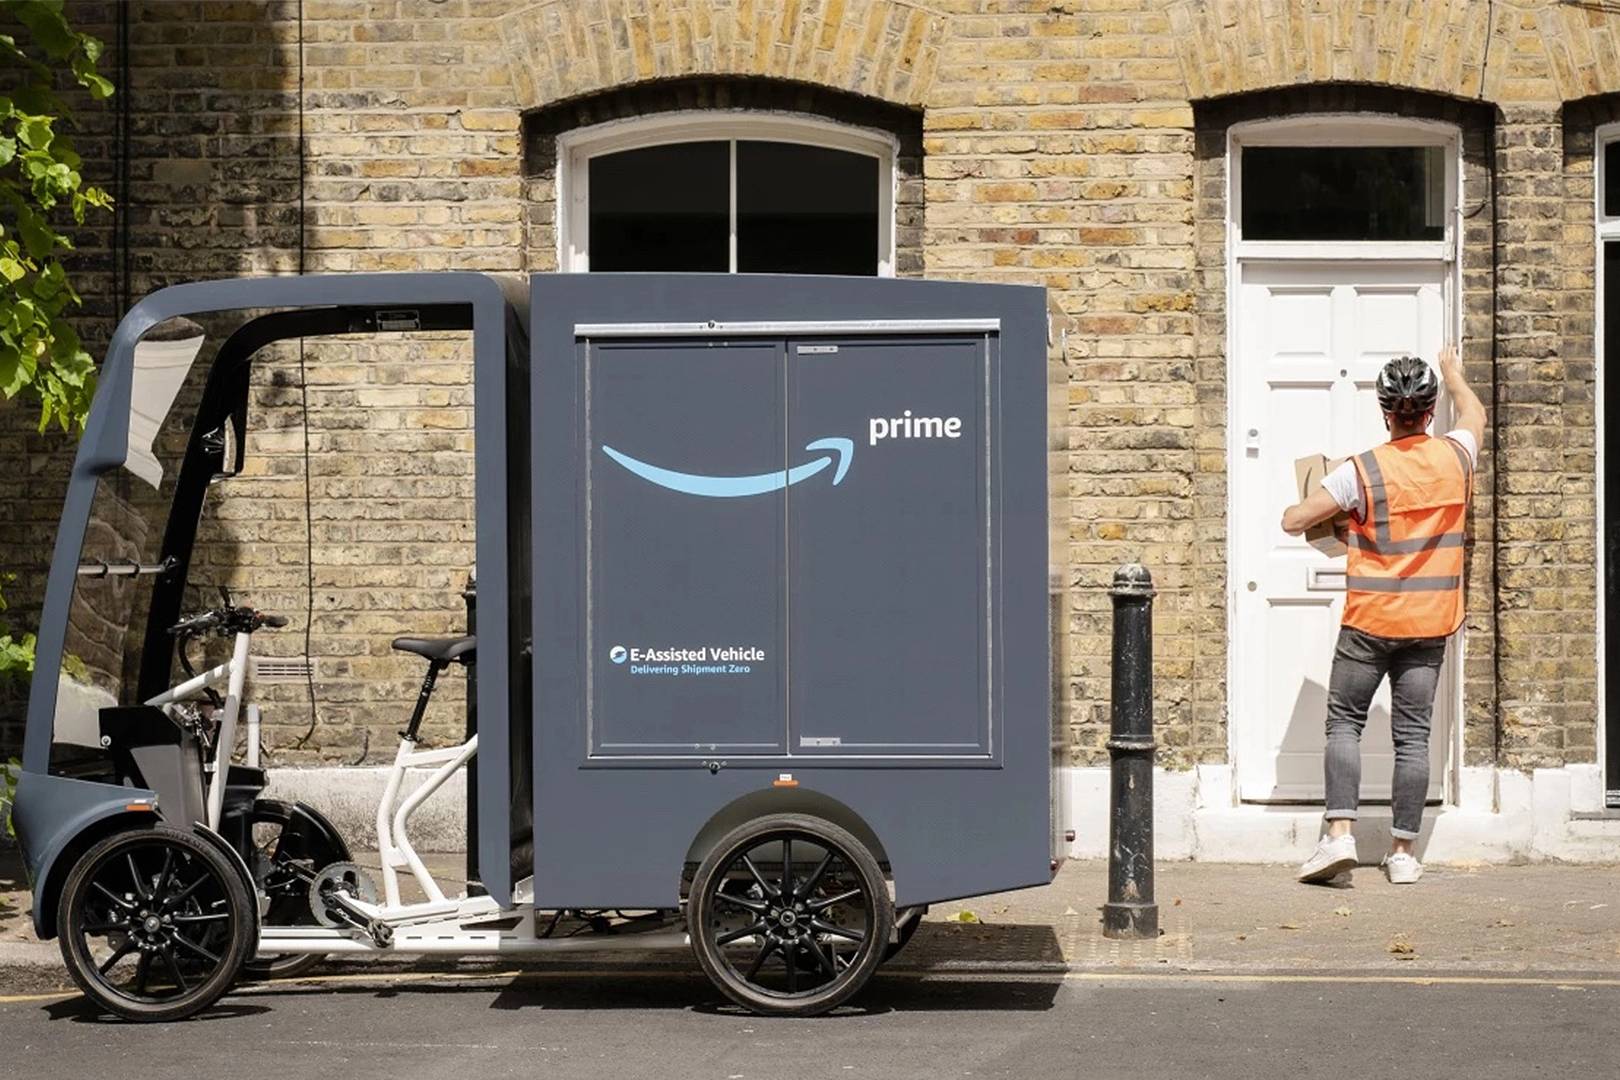 Amazon launches its fleet of e-cargo bikes in London for sustainable deliveries